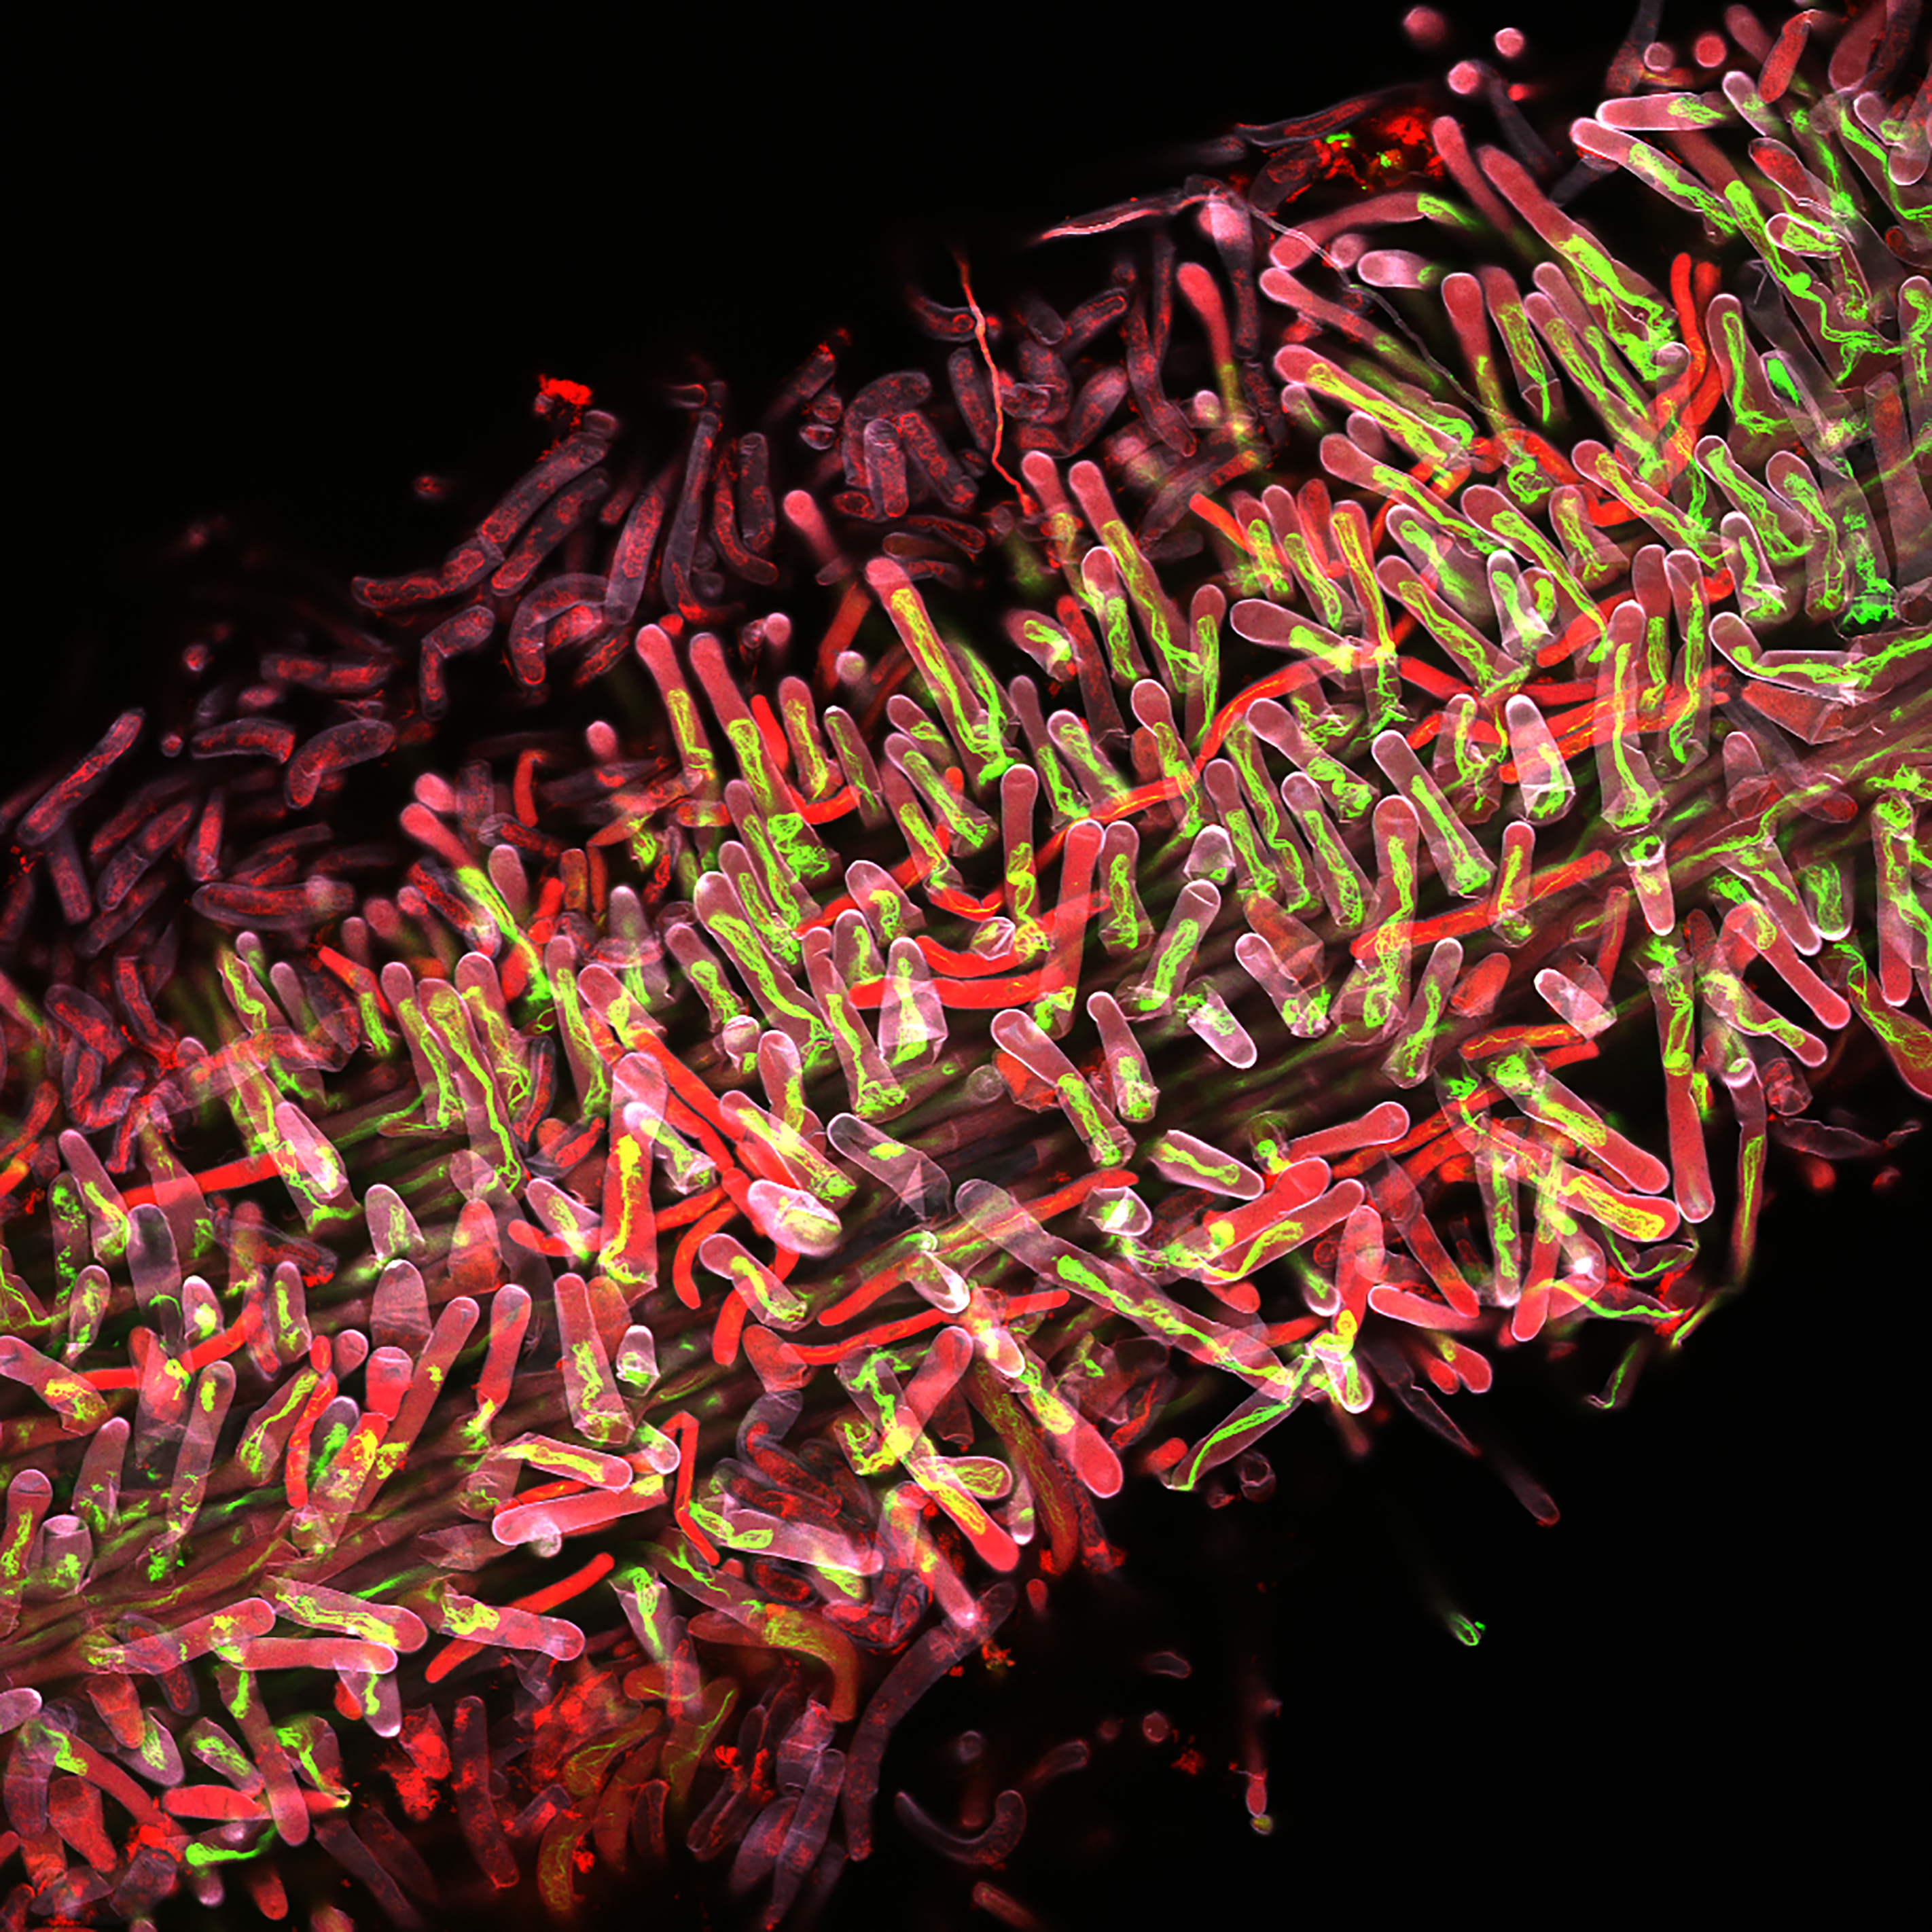 Part of a Medicago truncatula root showing the root hairs (red) which take up nutrients from the soil. Green labelled are the actin filaments, part of the cells skeleton and transport highways that help these hairs to grow and to fulfil their function. (I